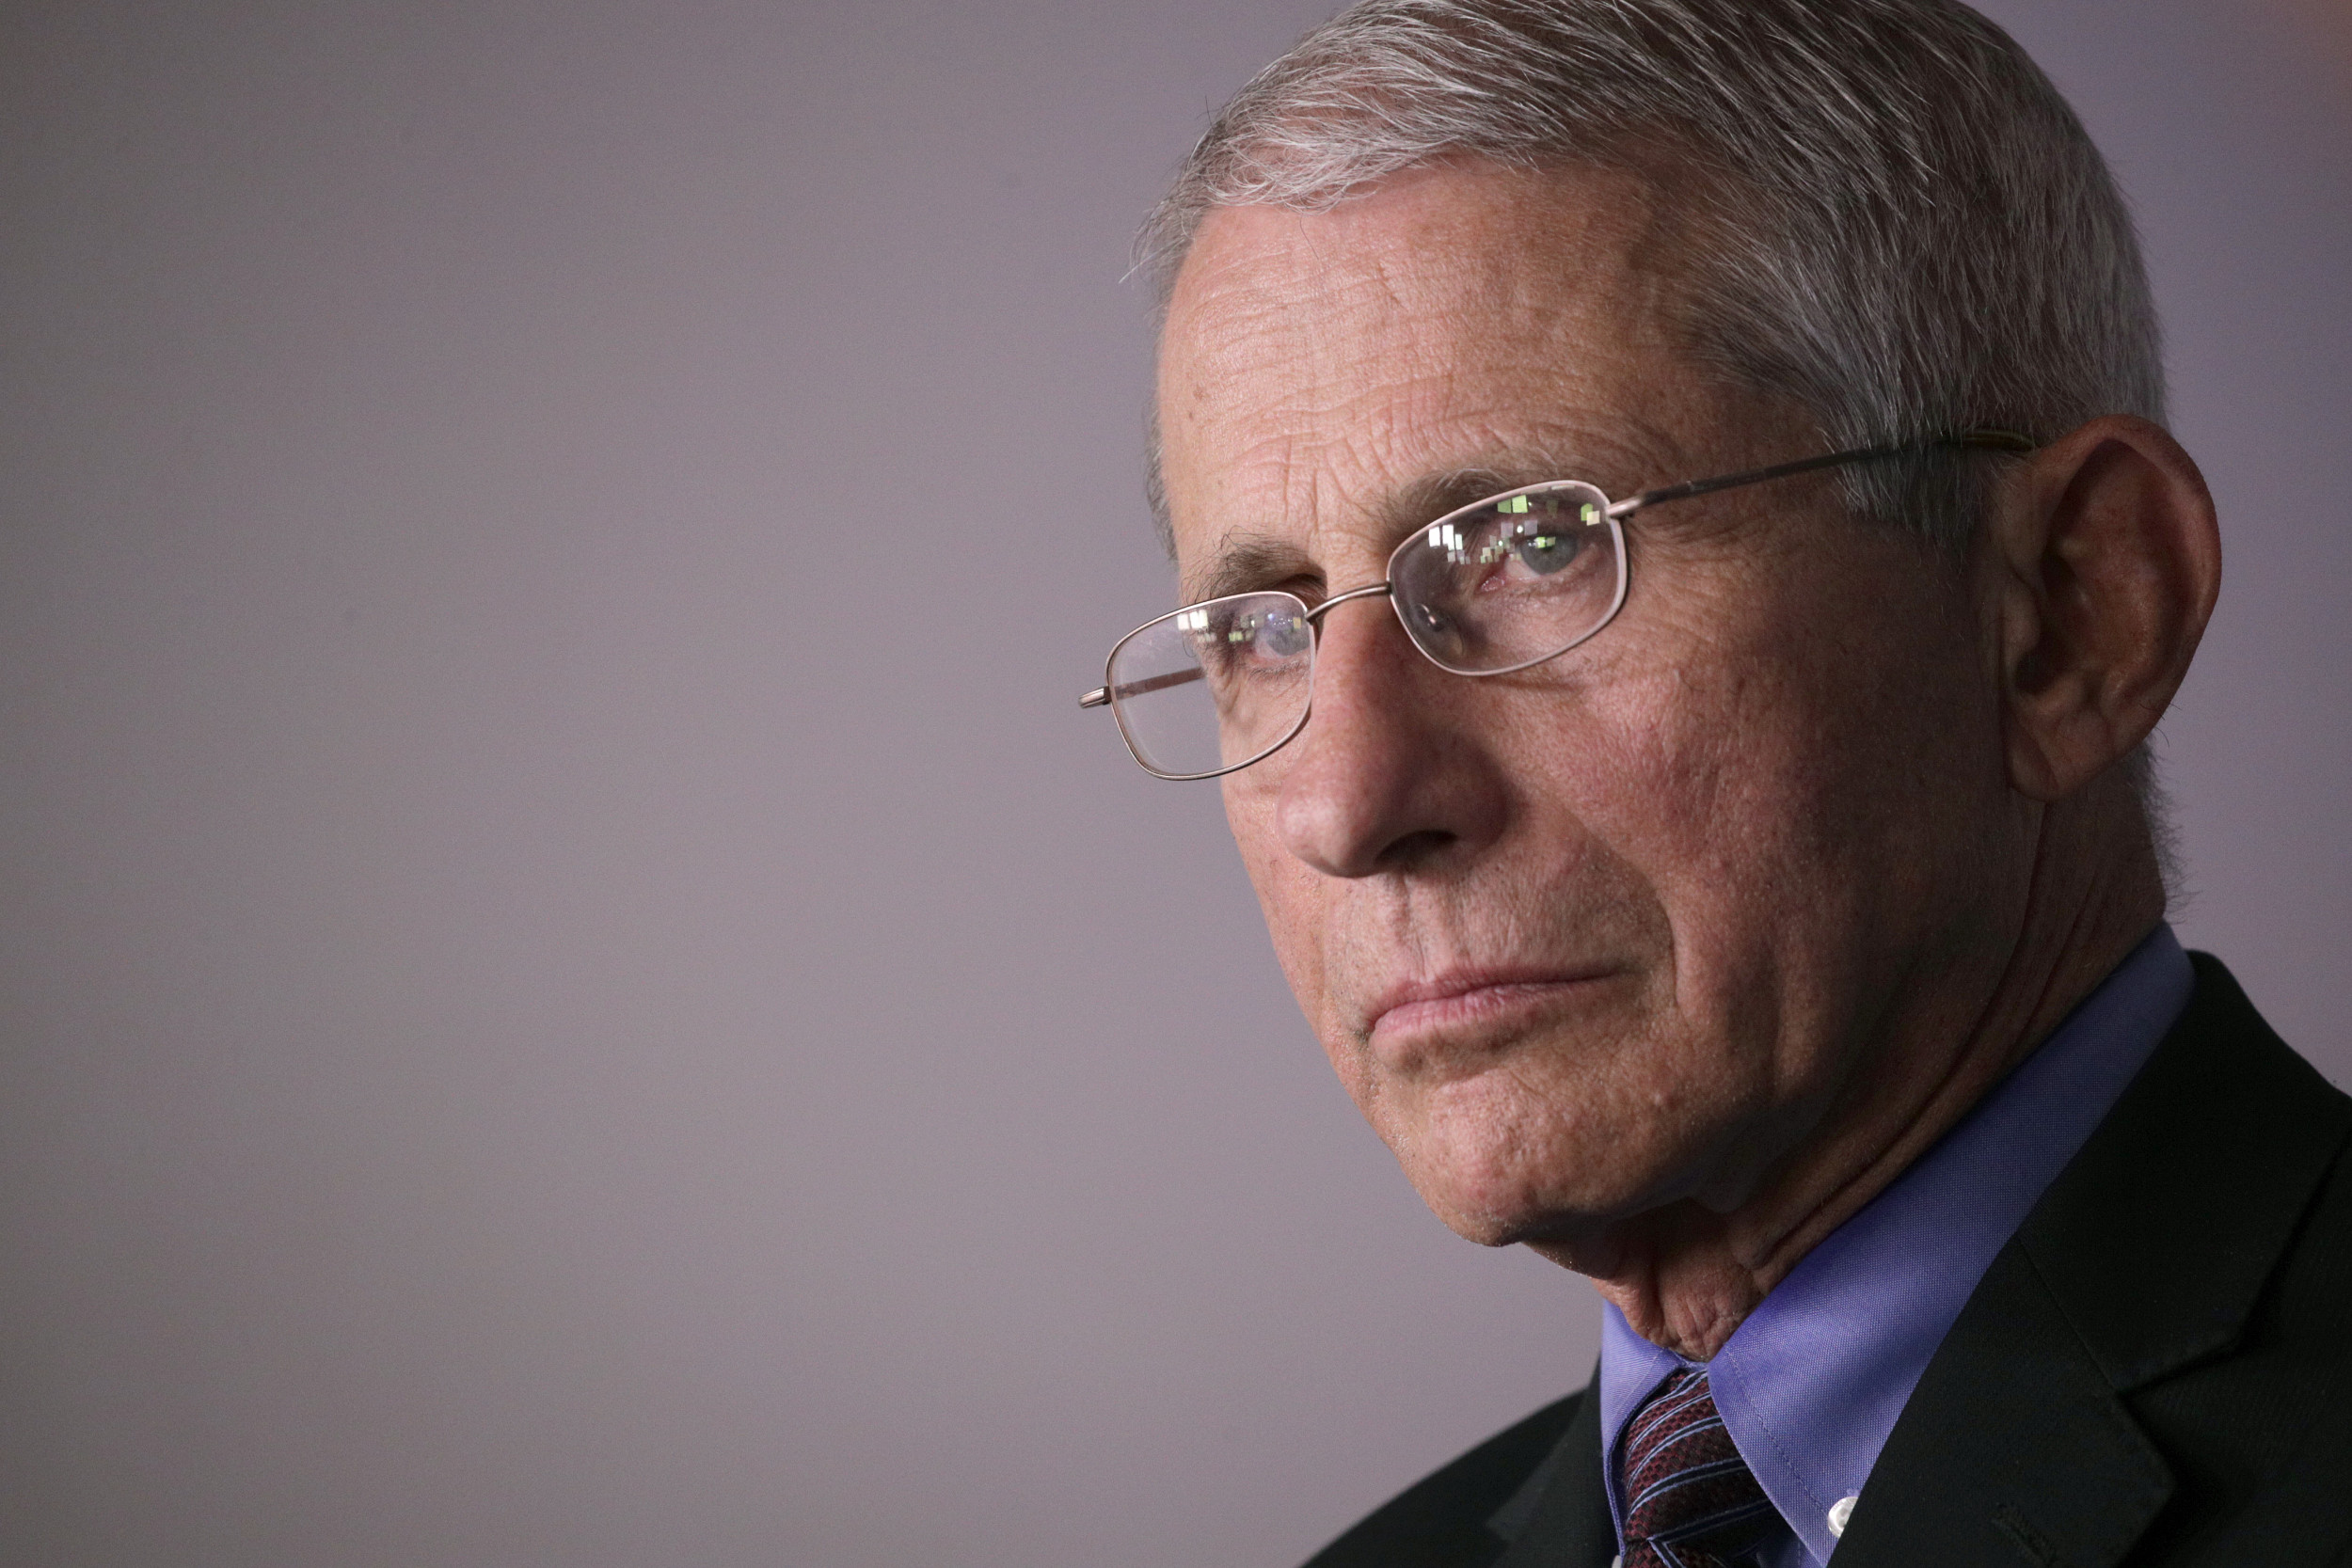 Dr. Anthony Fauci on how America can avoid a second wave of the coronavirus